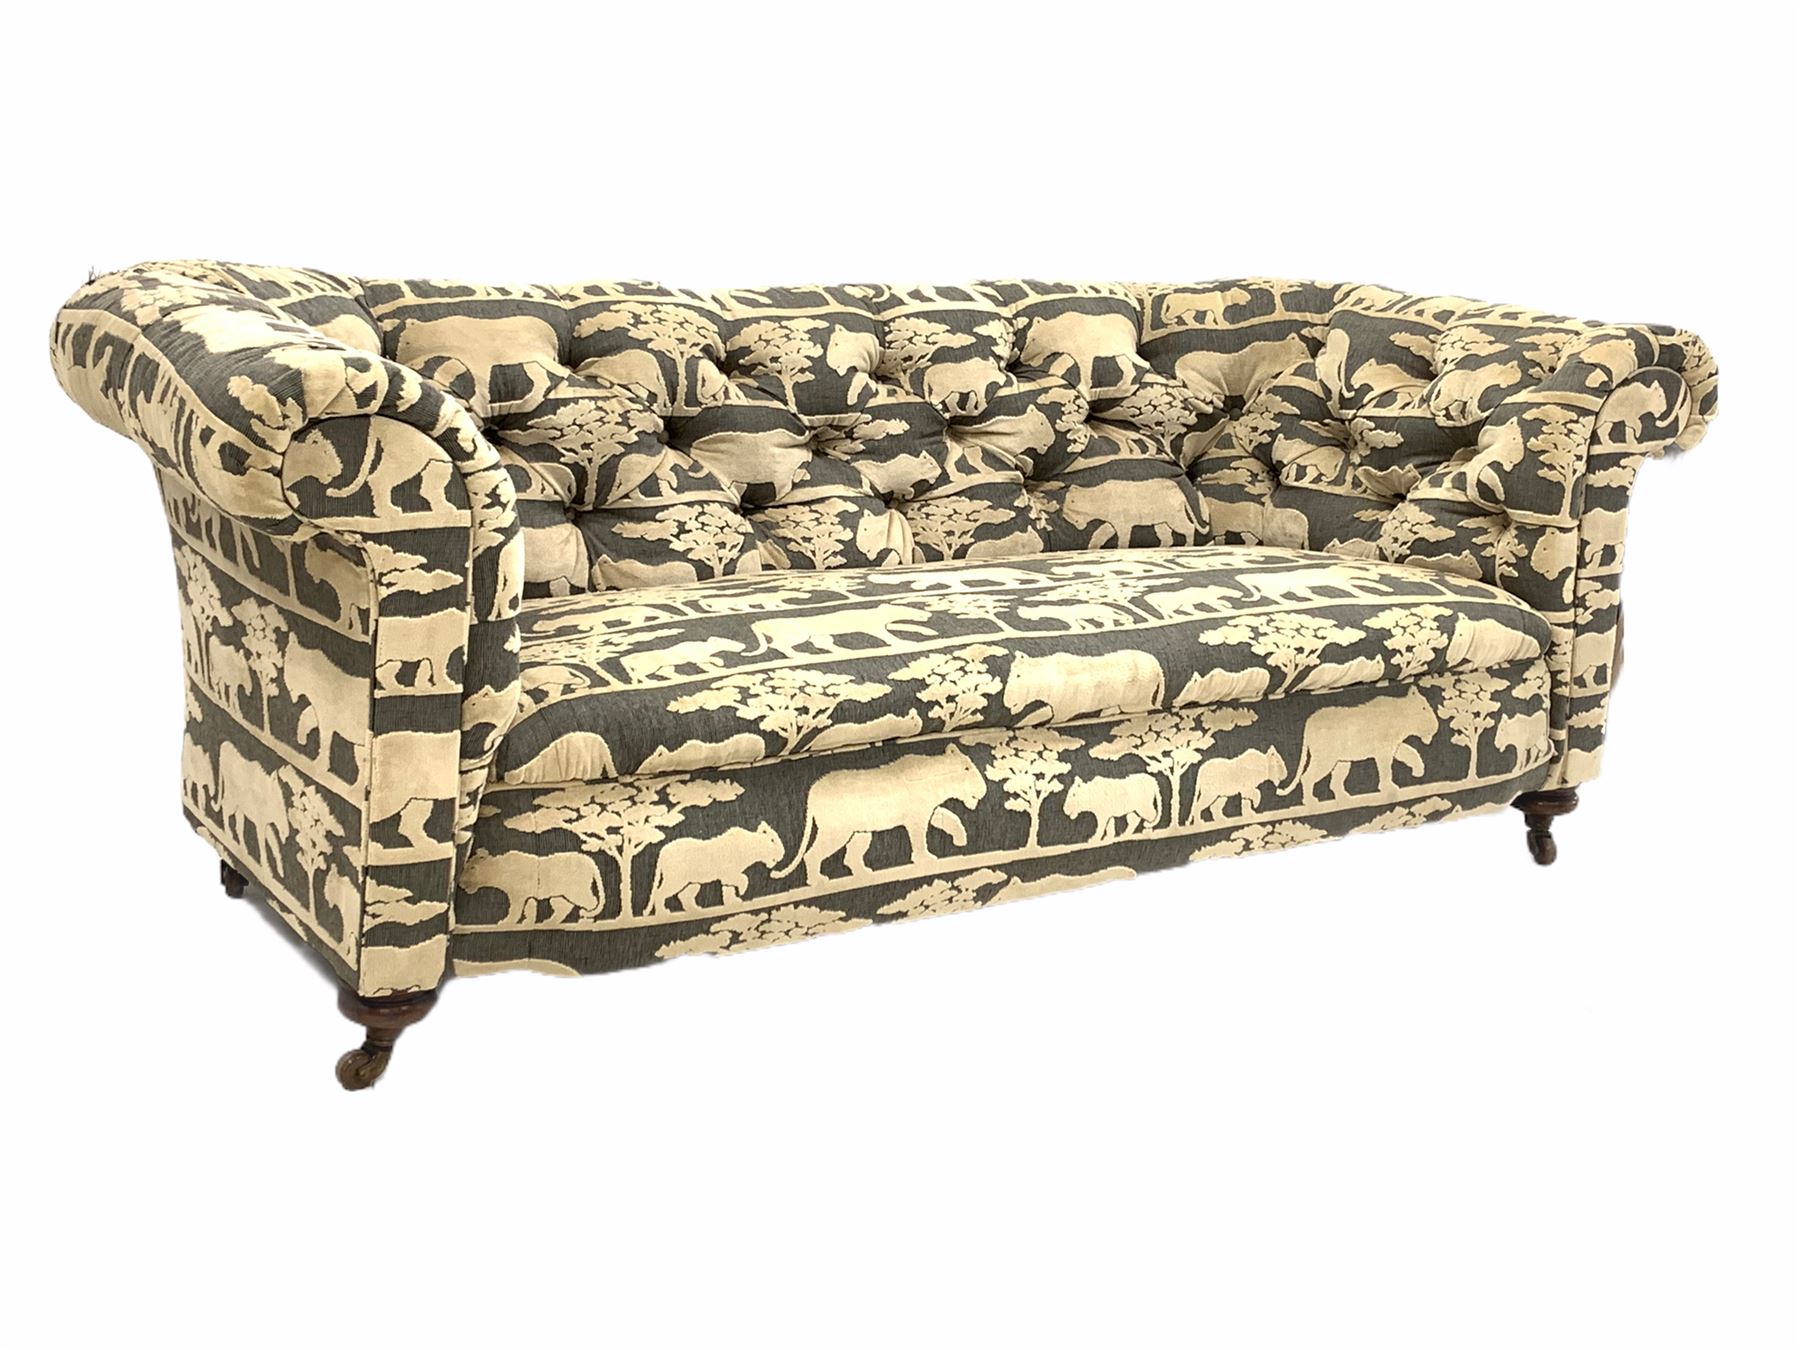 Victorian chesterfield sofa - Image 3 of 3